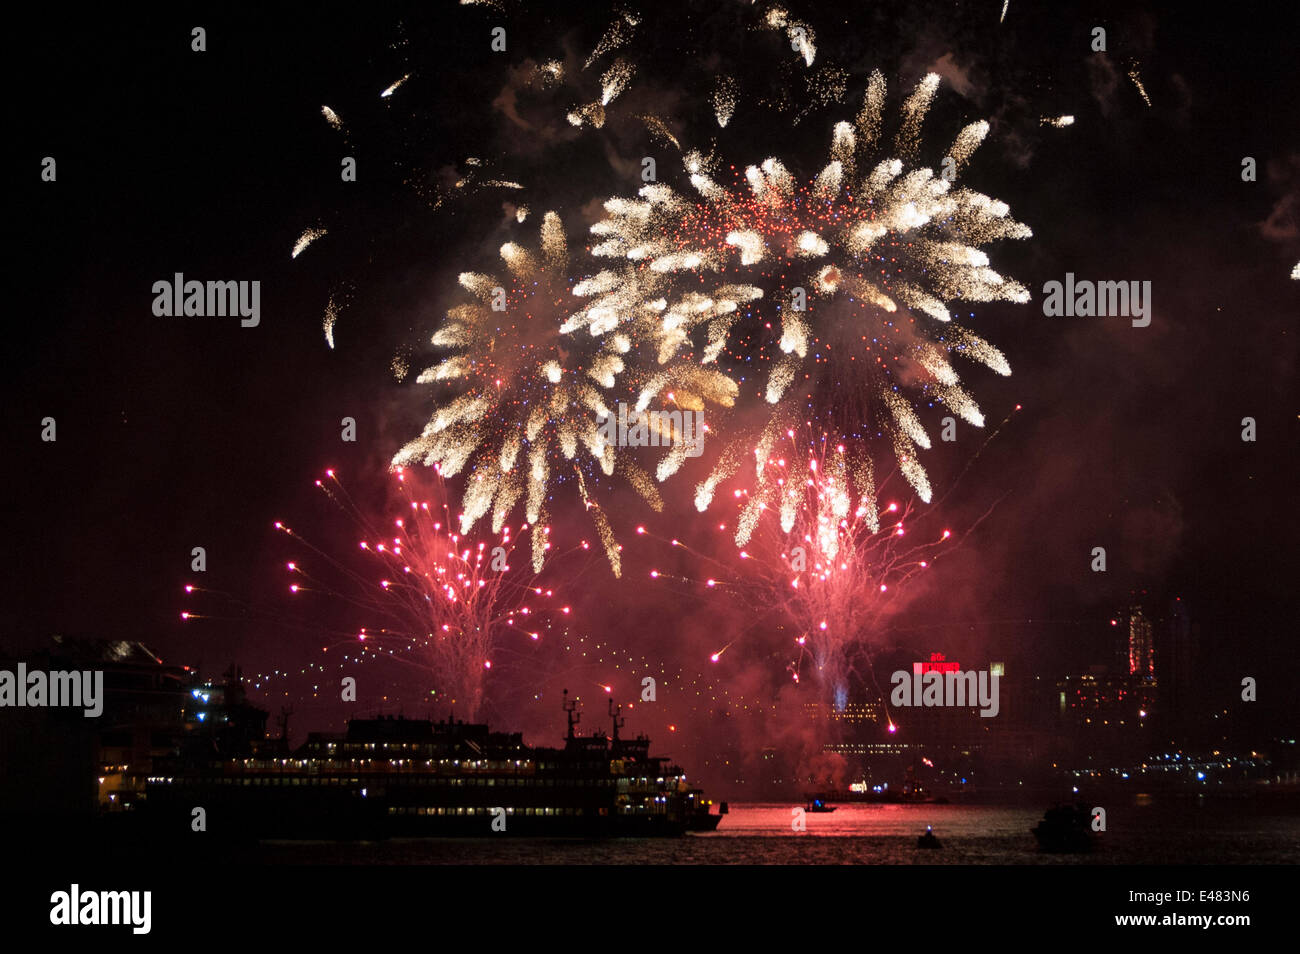 New York, US. July 4th, 2014. Fireworks exploded on the East River over the Brooklyn Bridge in celebration of the signing of the Declaration of Independence 238 years ago, when the American colonies declared their independence from Great Britain. Credit:  Terese Loeb Kreuzer/Alamy Live News Stock Photo